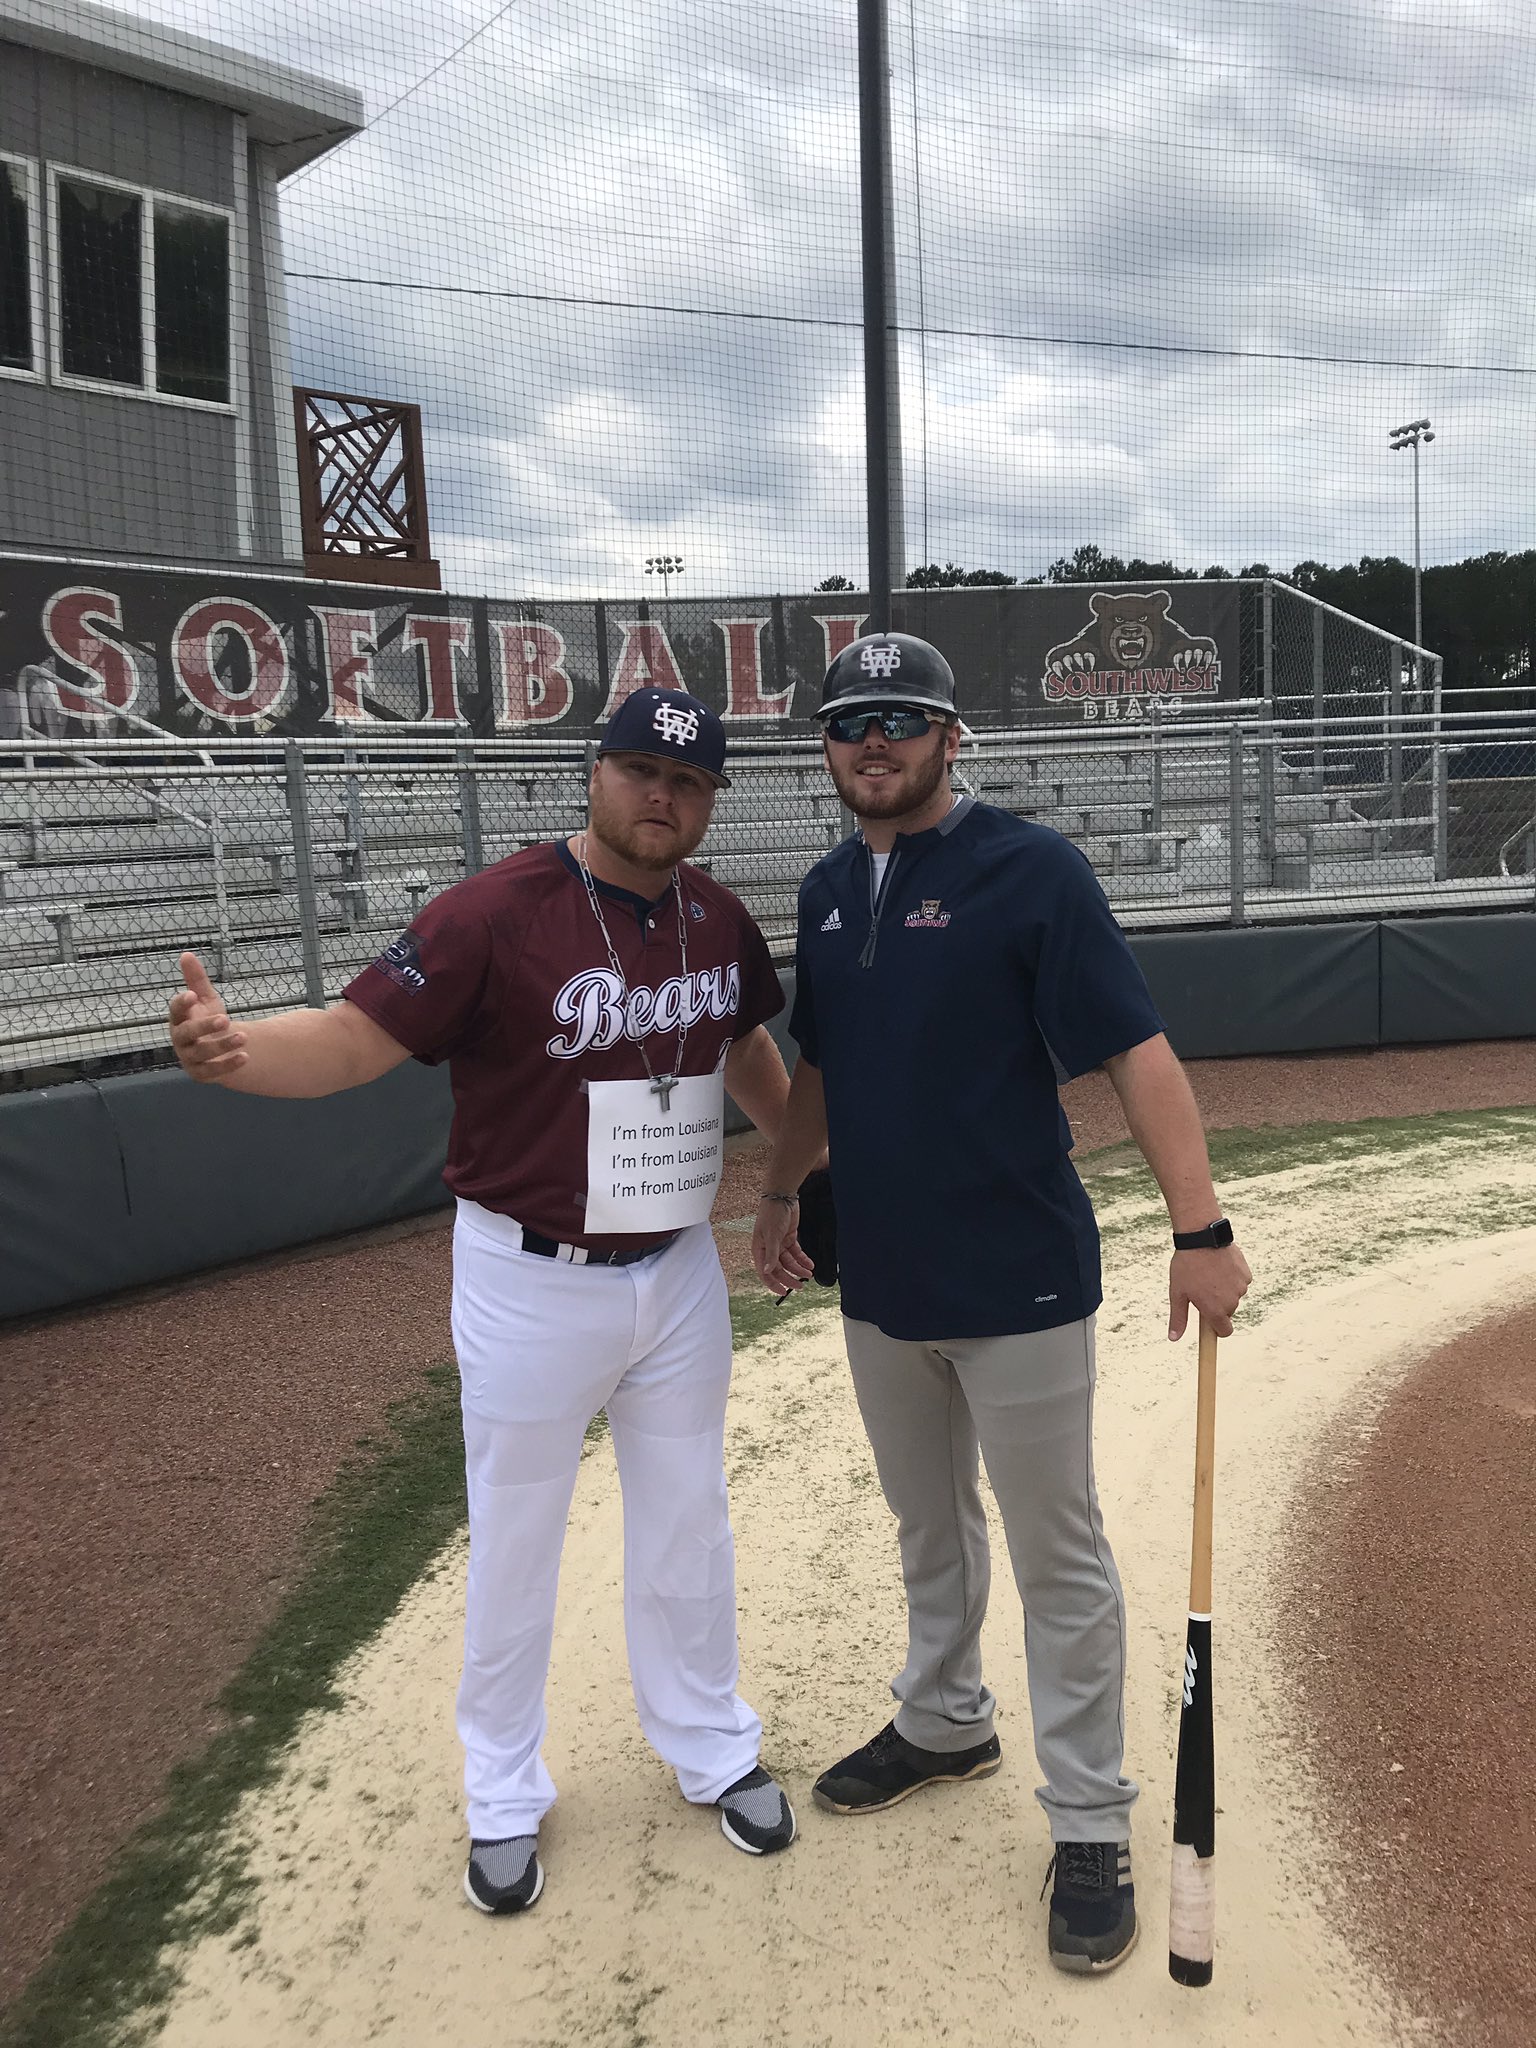 SMCC Baseball on X: When players dress up as coach and coach